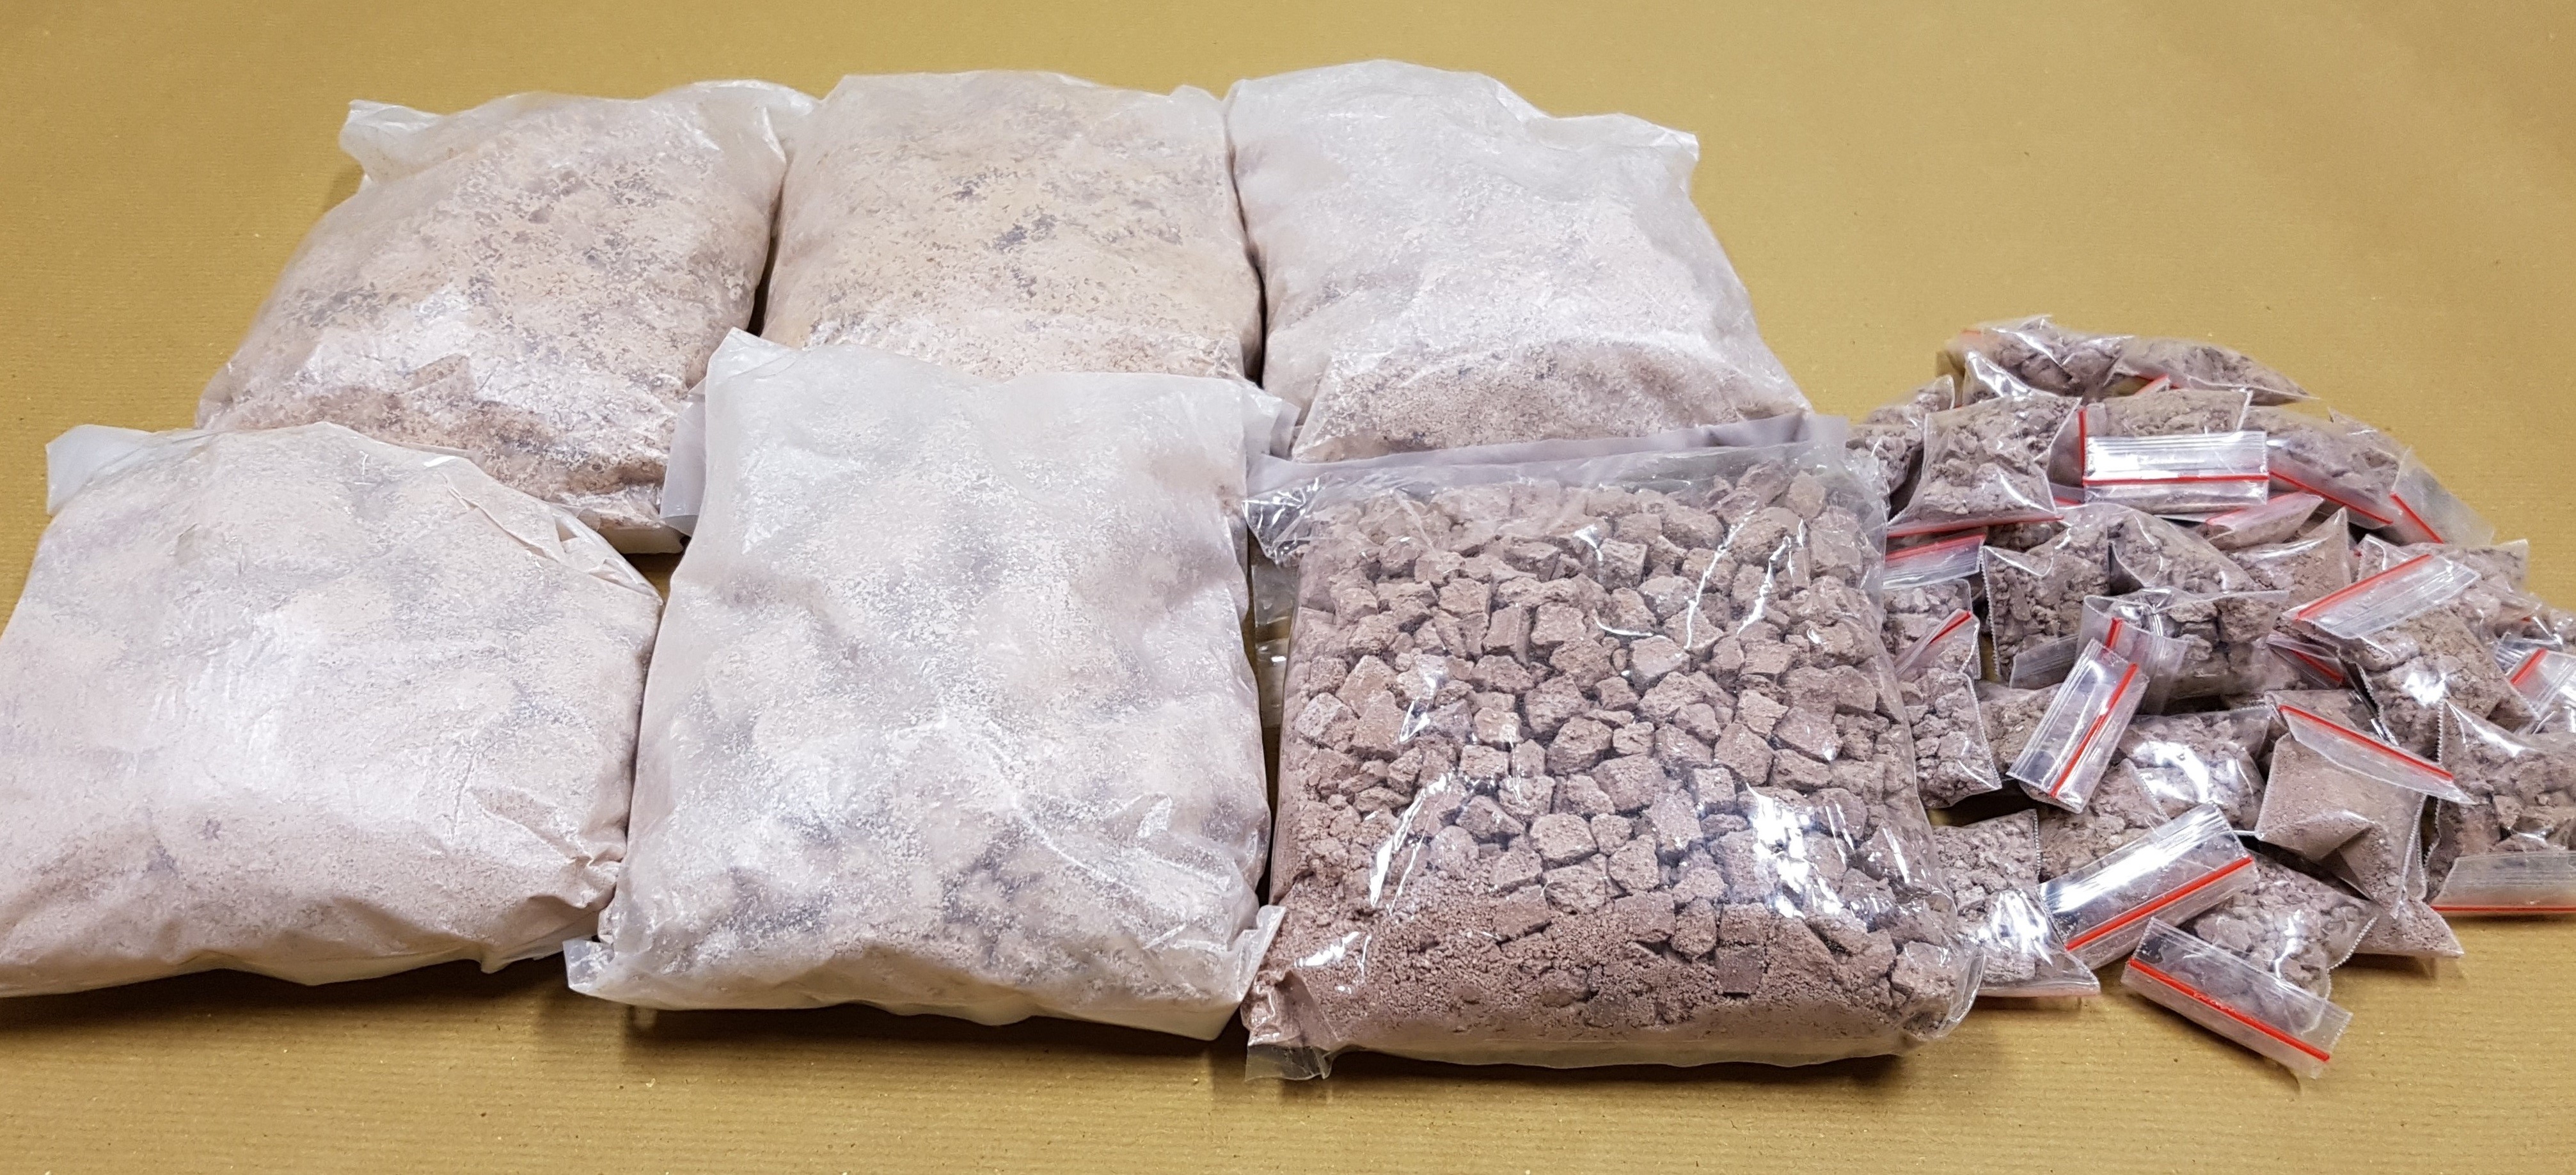 Heroin seized in CNB operation on 1 December 2016.